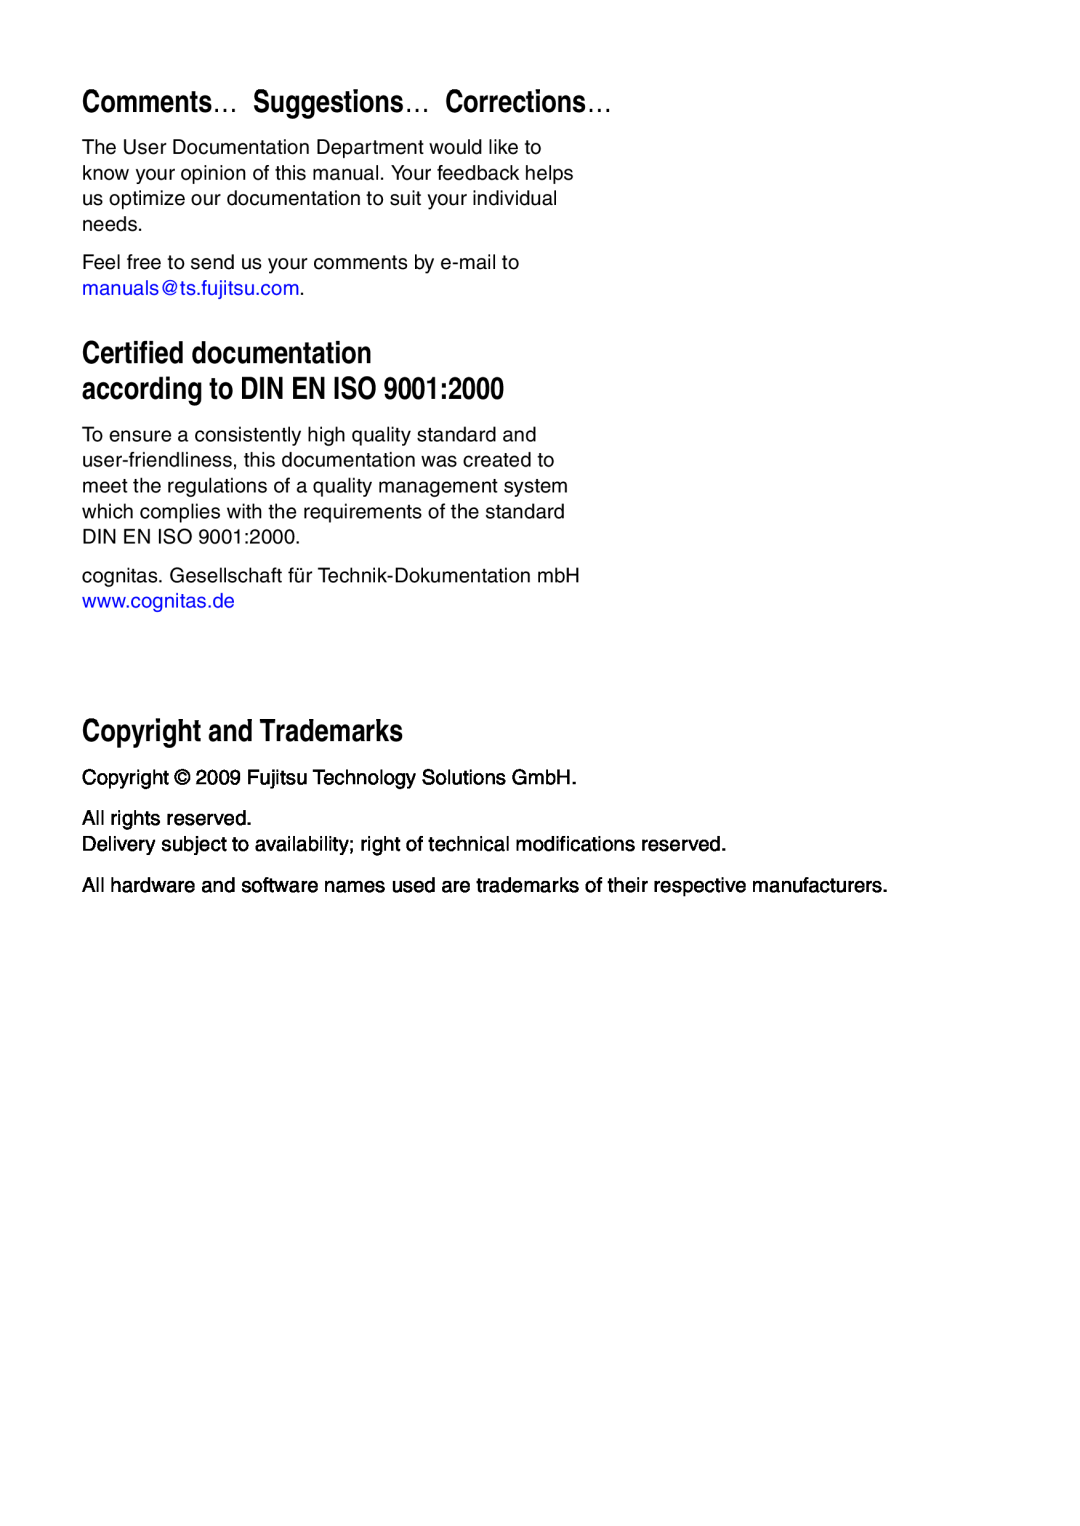 Fujitsu V4.90 manual Comments… Suggestions… Corrections…, Copyright and Trademarks 